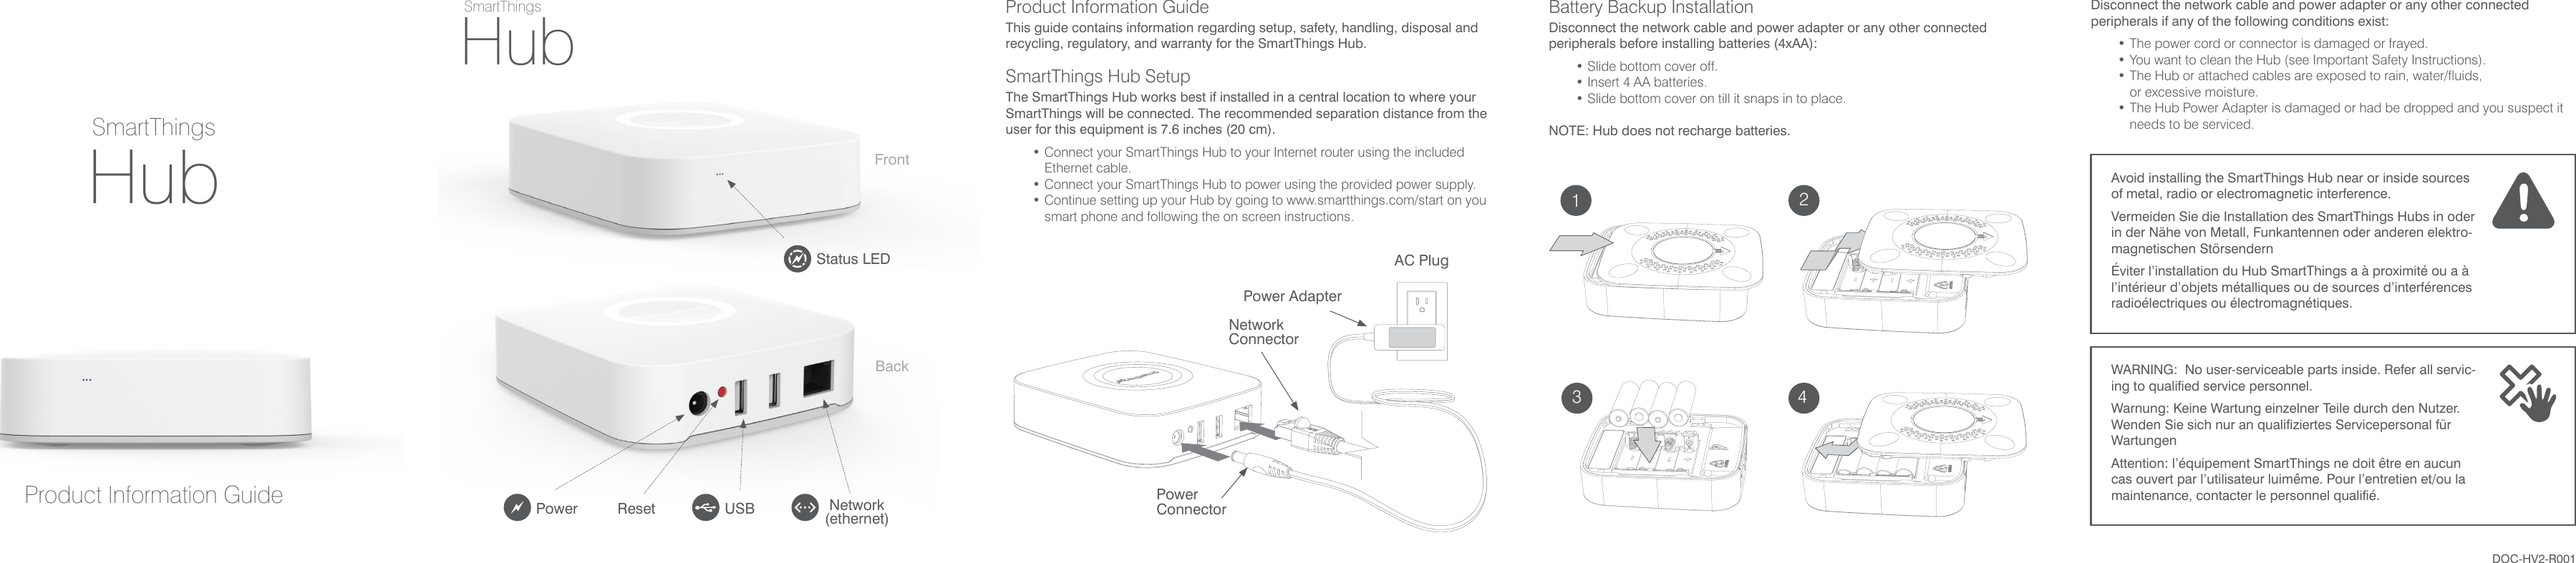 AC PlugPower AdapterPower ConnectorNetworkConnectorSmartThingsProduct Information GuideSmartThingsHubHubDOC-HV2-R001Power Reset USB Network(ethernet)Status LEDProduct Information GuideThis guide contains information regarding setup, safety, handling, disposal and recycling, regulatory, and warranty for the SmartThings Hub.SmartThings Hub SetupThe SmartThings Hub works best if installed in a central location to where your SmartThings will be connected. The recommended separation distance from the user for this equipment is 7.6 inches (20 cm).• Connect your SmartThings Hub to your Internet router using the included Ethernet cable.• Connect your SmartThings Hub to power using the provided  power supply.• Continue setting up your Hub by going to www.smartthings.com/start on you smart phone and following the on screen instructions.Disconnect the network cable and power adapter or any other connected peripherals if any of the following conditions exist:• The power cord or connector is damaged or frayed.• You want to clean the Hub (see Important Safety Instructions).• The Hub or attached cables are exposed to rain, water/fluids,  or excessive moisture.• The Hub Power Adapter is damaged or had be dropped and you suspect it needs to be serviced. Battery Backup InstallationDisconnect the network cable and power adapter or any other connected peripherals before installing batteries (4xAA):• Slide bottom cover off.• Insert 4 AA batteries.• Slide bottom cover on till it snaps in to place.NOTE: Hub does not recharge batteries.FrontBackAvoid installing the SmartThings Hub near or inside sources of metal,  radio or electromagnetic interference.Vermeiden Sie die Installation des SmartThings Hubs in oder in der  Nähe von Metall, Funkantennen oder anderen elektro-magnetischen StörsendernÉviter l’installation du Hub SmartThings a à proximité ou a à l’intérieur d’objets métalliques ou de sources d’interférences radioélectriques ou électromagnétiques.WARNING:  No user-serviceable parts inside. Refer all servic-ing to qualified service personnel.Warnung: Keine Wartung einzelner Teile durch den Nutzer. Wenden Sie sich nur an qualifiziertes Servicepersonal für WartungenAttention: l’équipement SmartThings ne doit être en aucun cas ouvert par l’utilisateur luimême. Pour l’entretien et/ou la maintenance, contacter le personnel qualifié.123 4